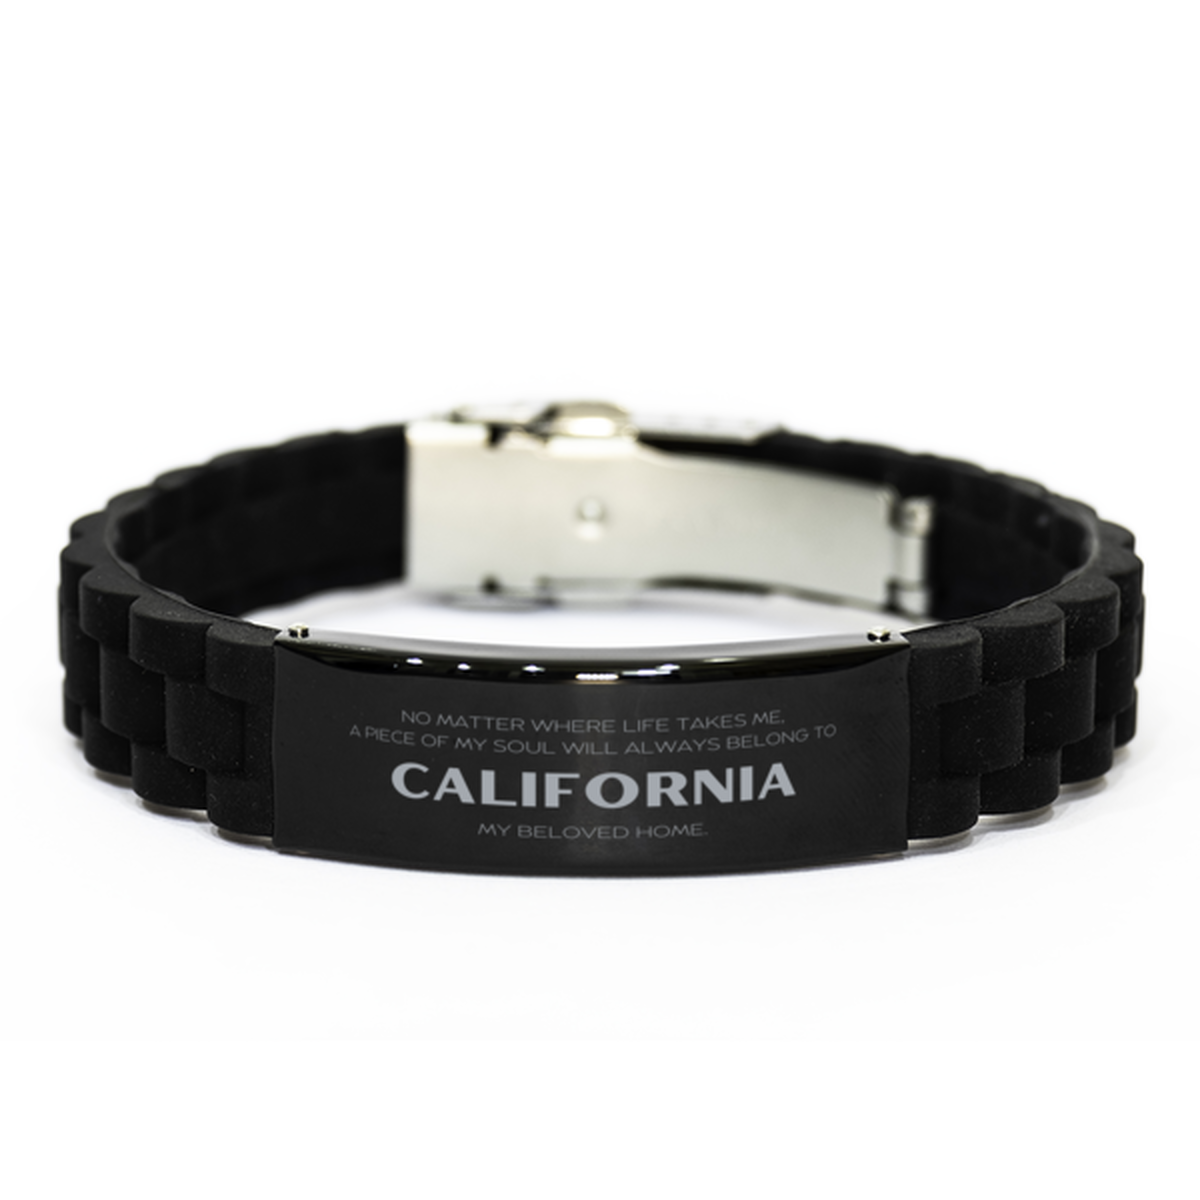 Love California State Gifts, My soul will always belong to California, Proud Black Glidelock Clasp Bracelet, Birthday Unique Gifts For California Men, Women, Friends